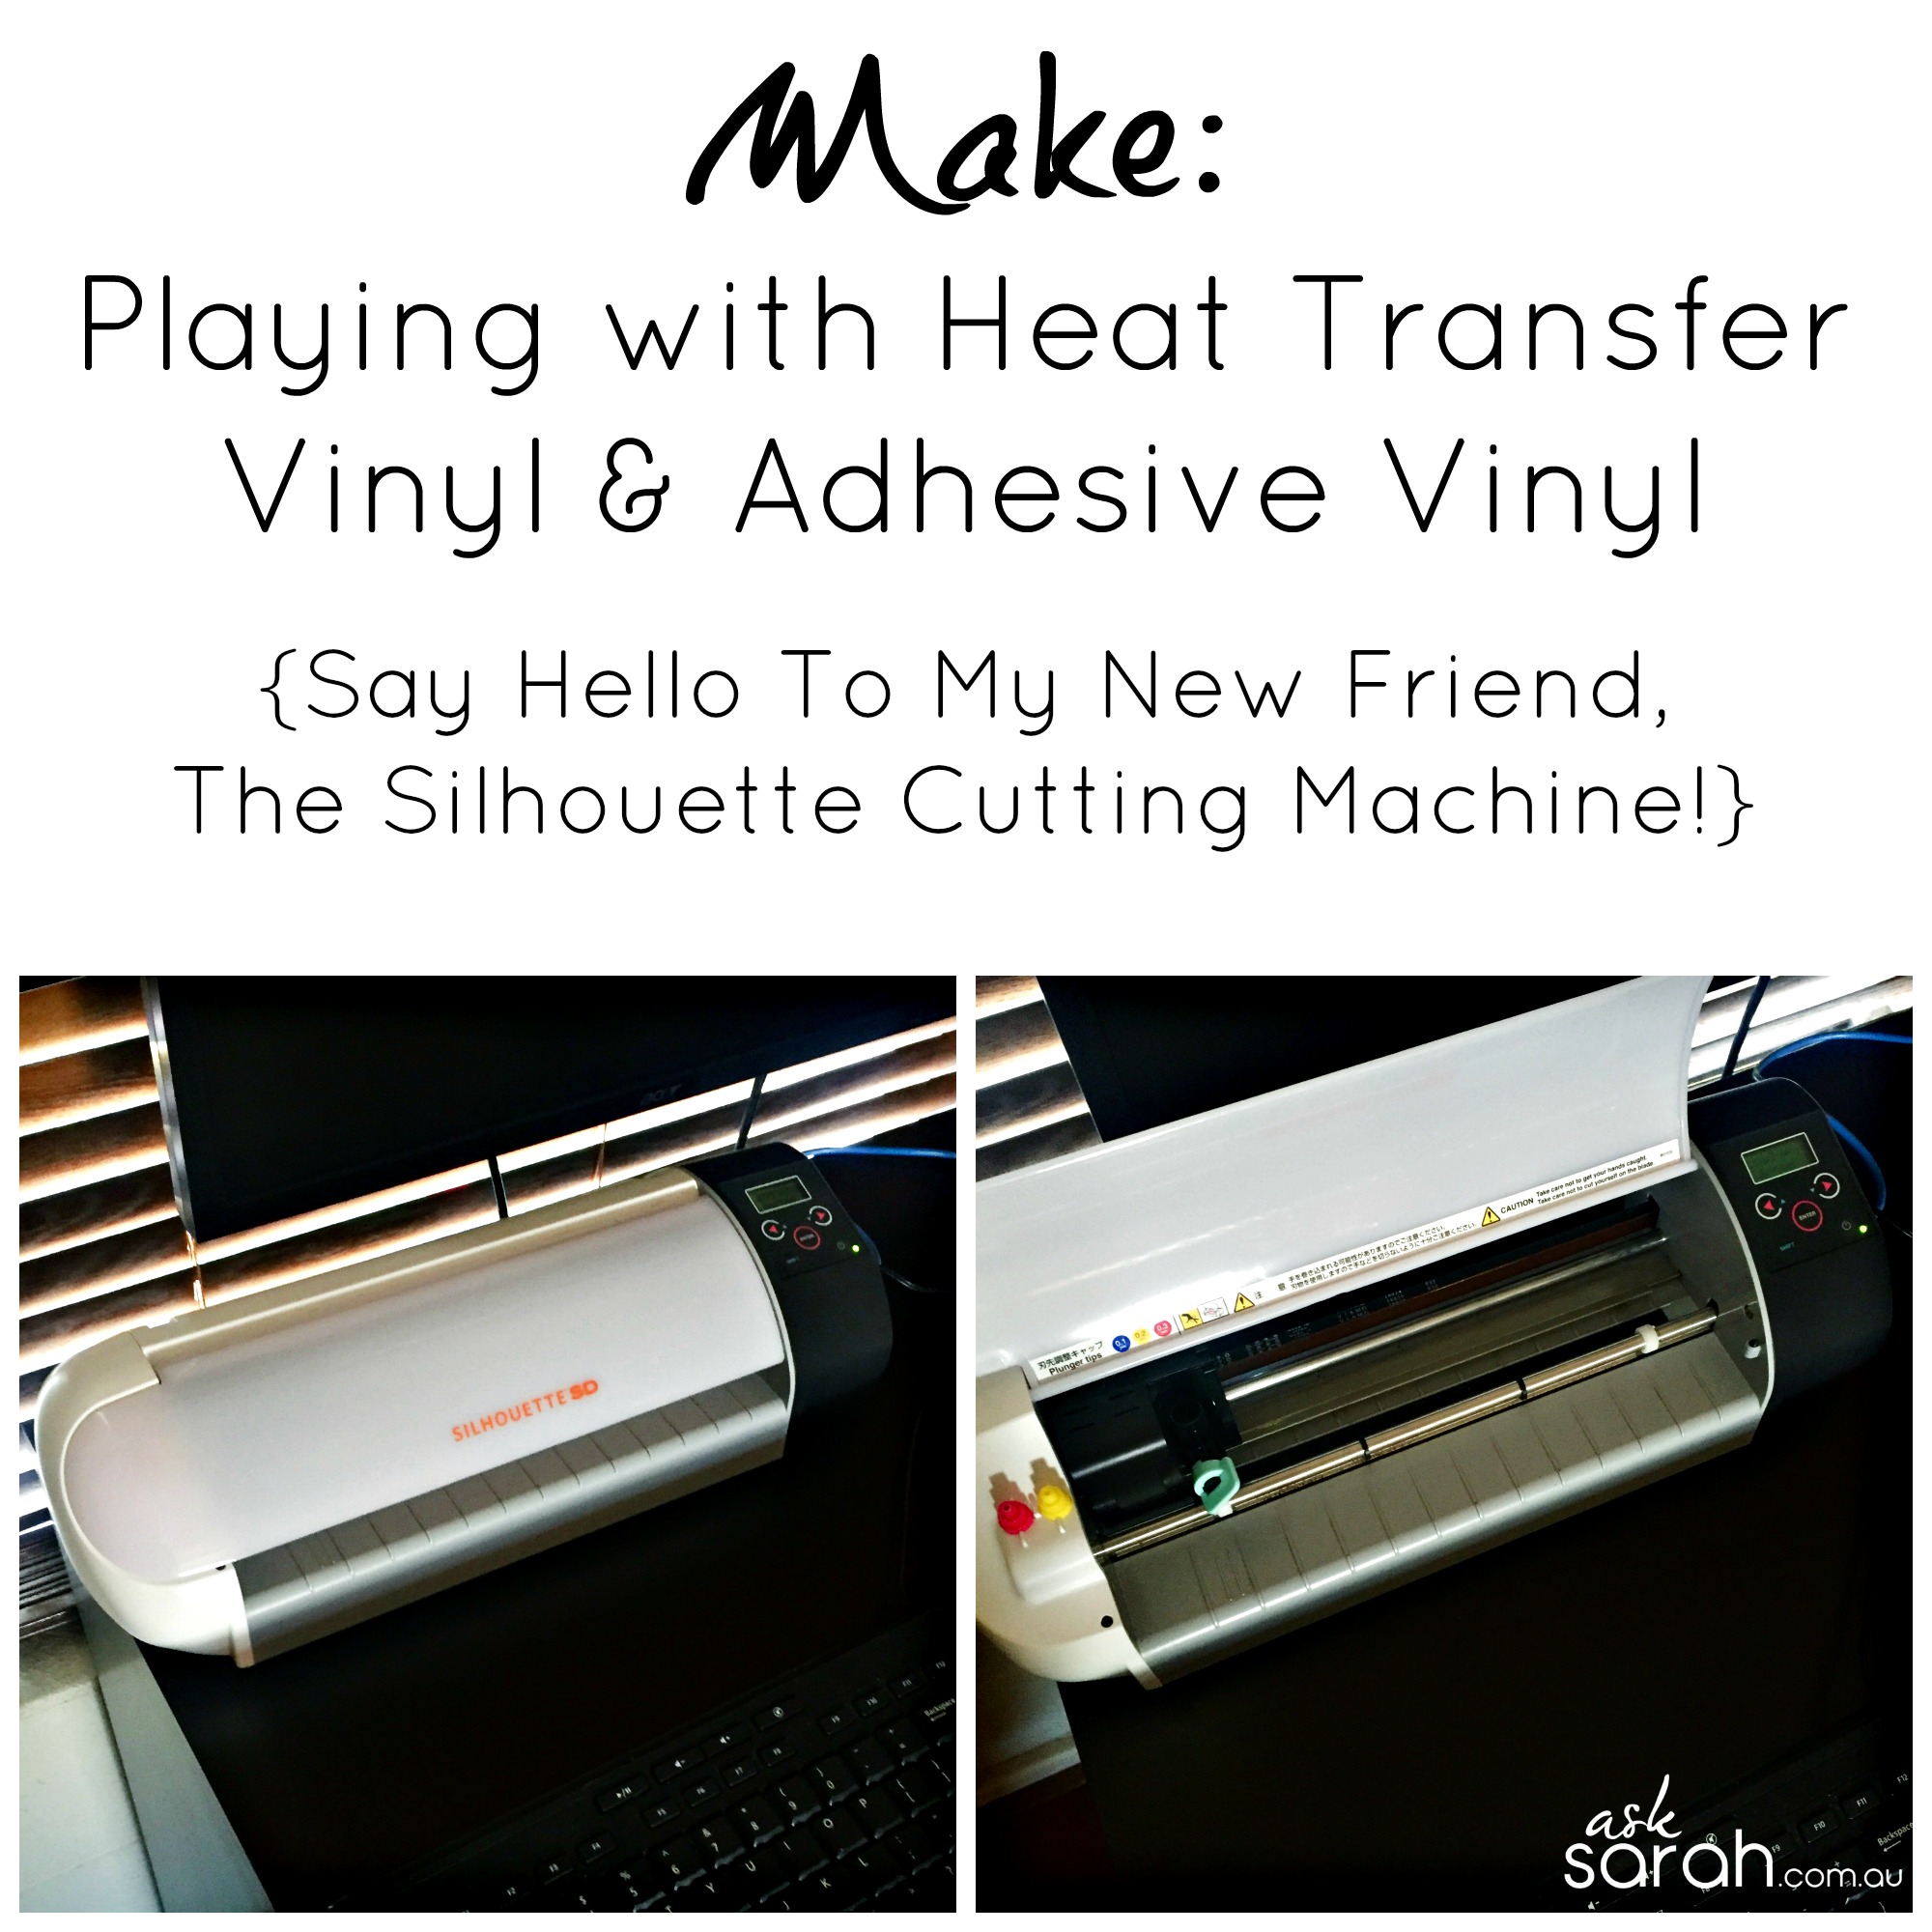 Make: Playing with Heat Transfer Vinyl & Adhesive Vinyl {Say Hello To My New Friend, The Silhouette Cutting Machine!}